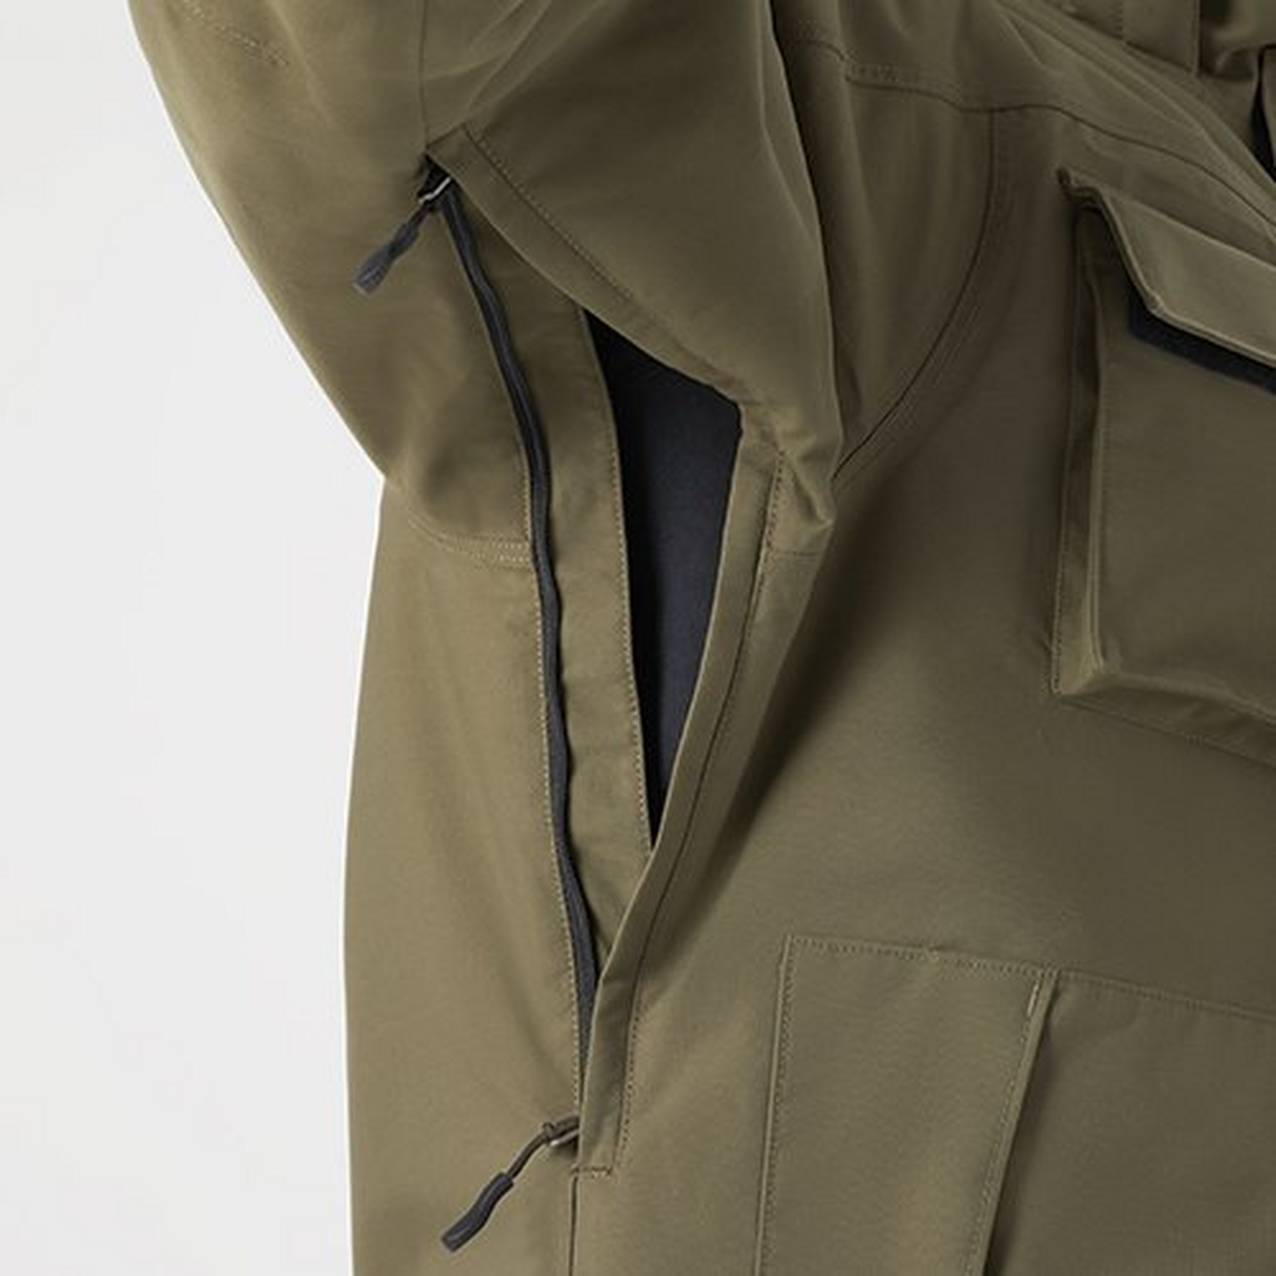 Close up of a zippered opening in the underarm of a jacket